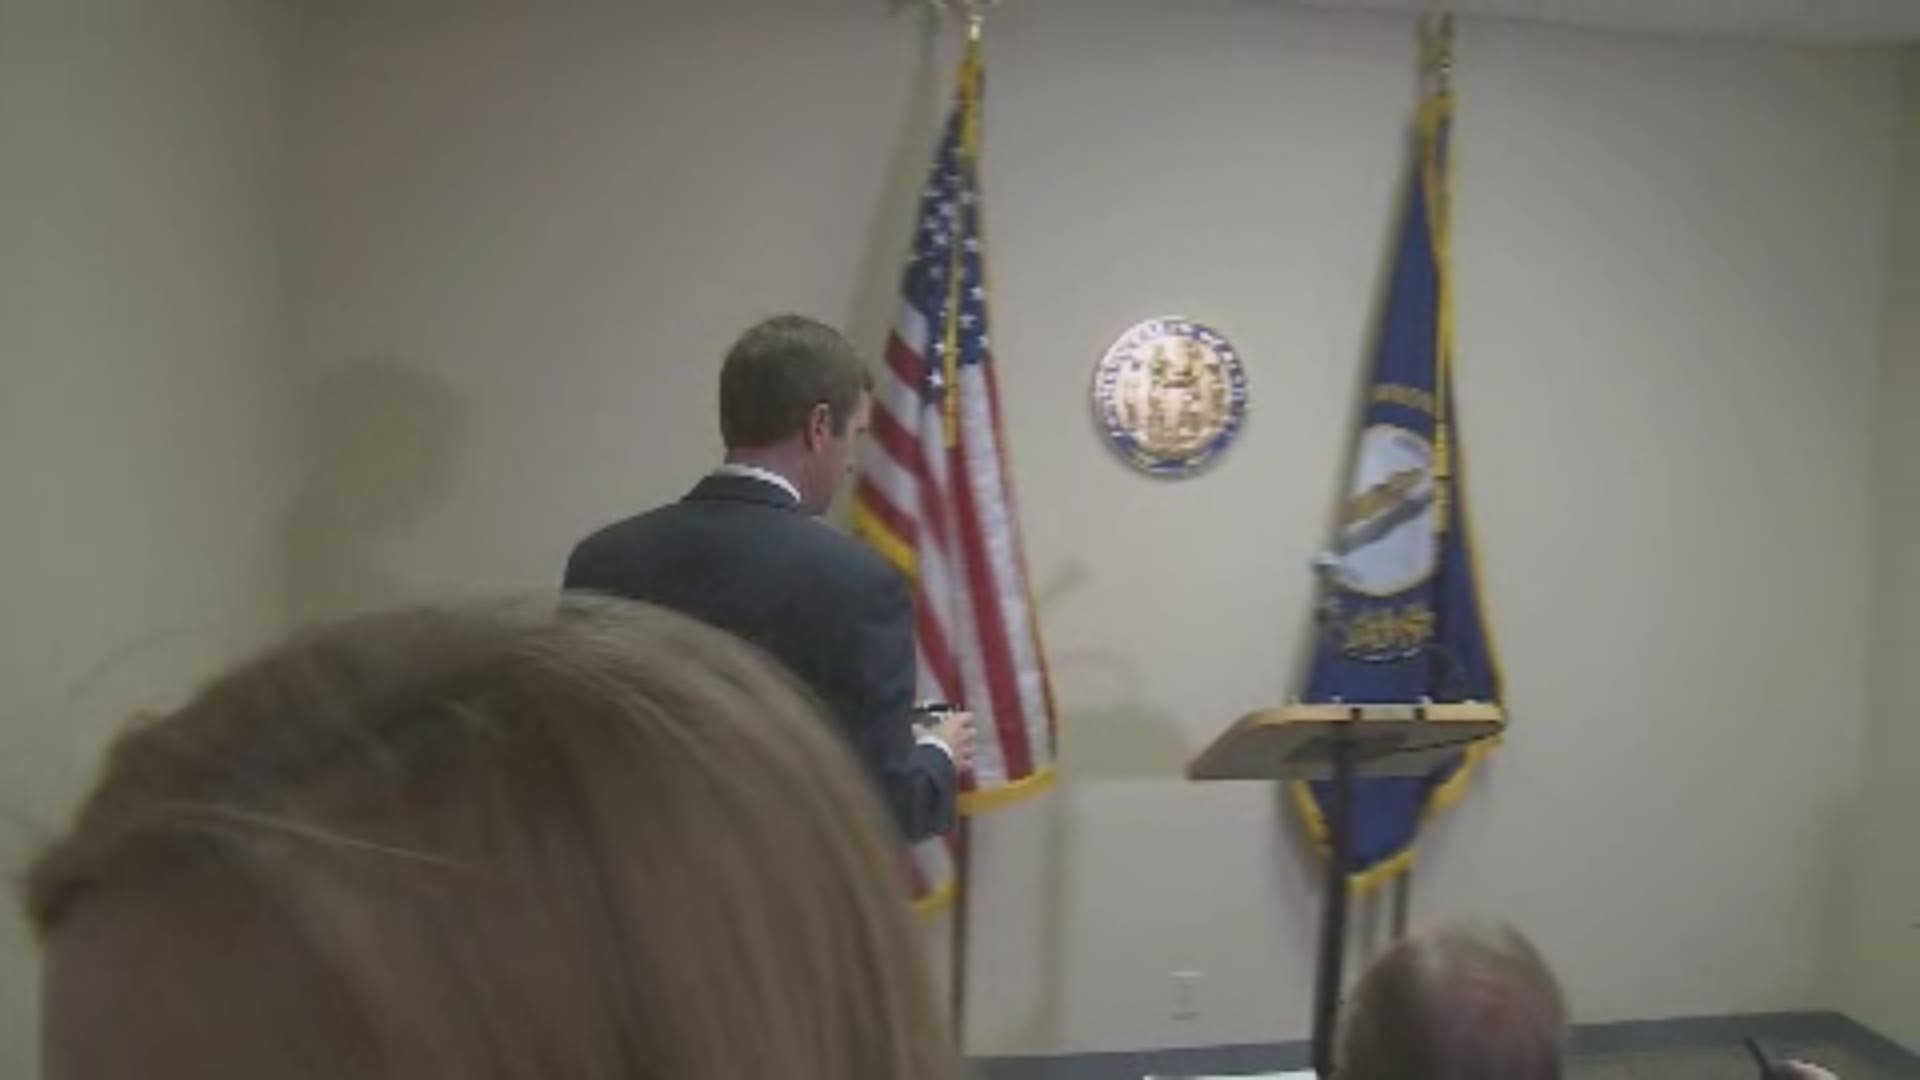 Andy Beshear said the subpoenas are not lawful. The attorney general is sending a letter to the governor to demand they be rescinded in the next 10 days.